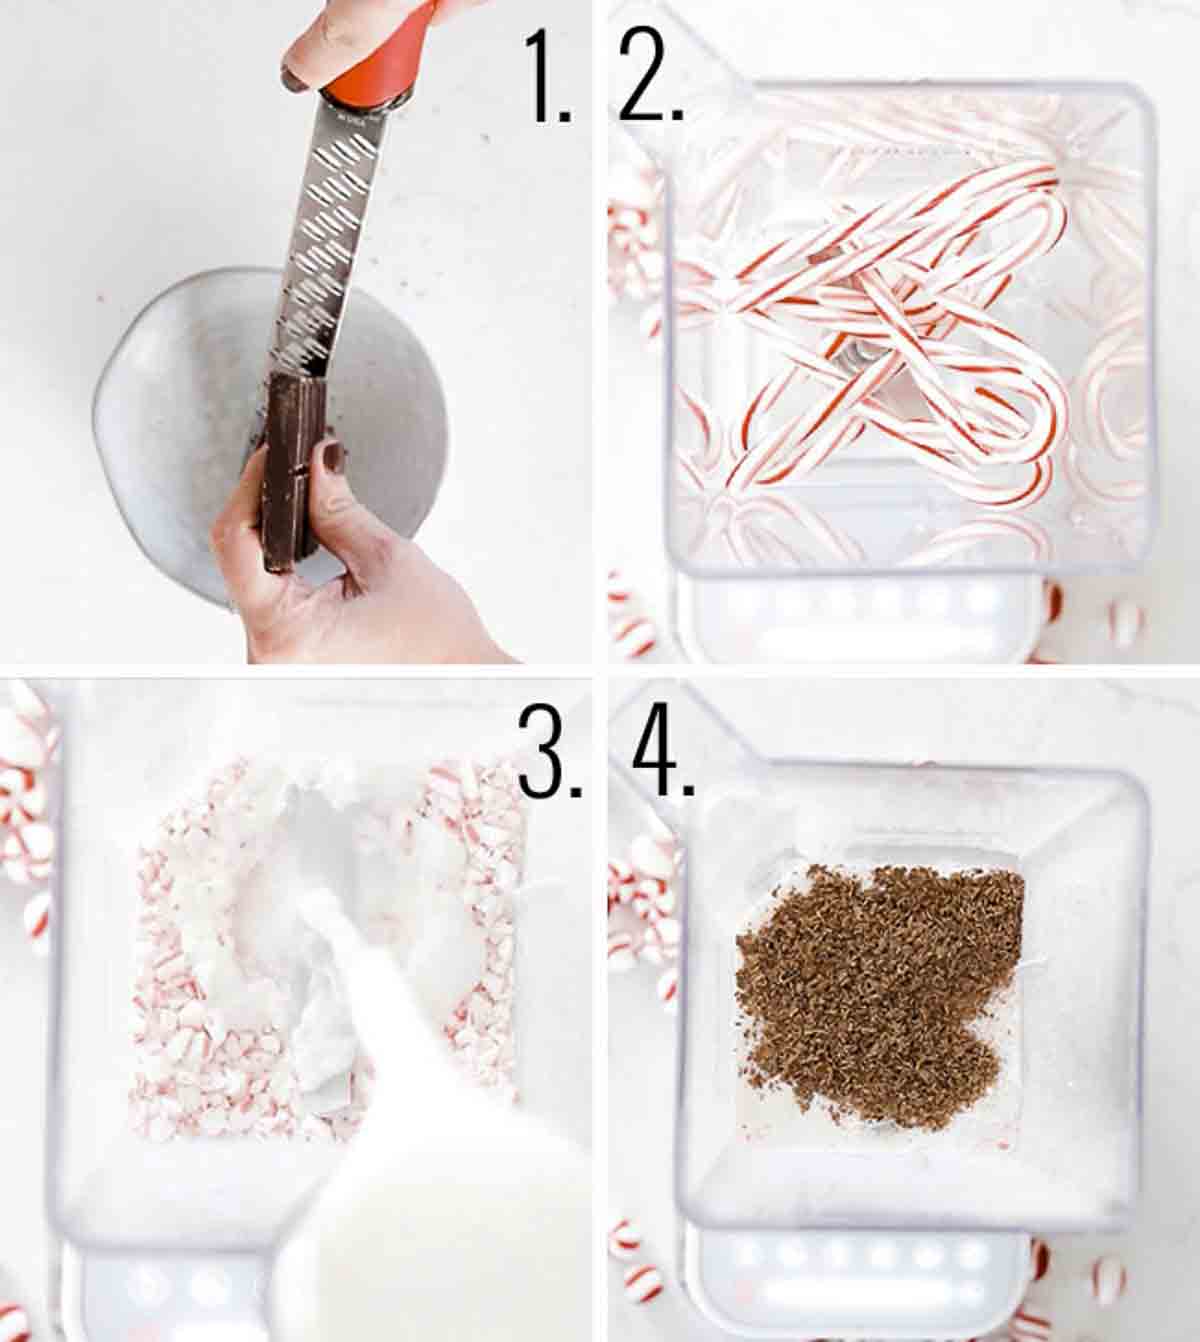 Candy canes and chocolate being placed in a blender.